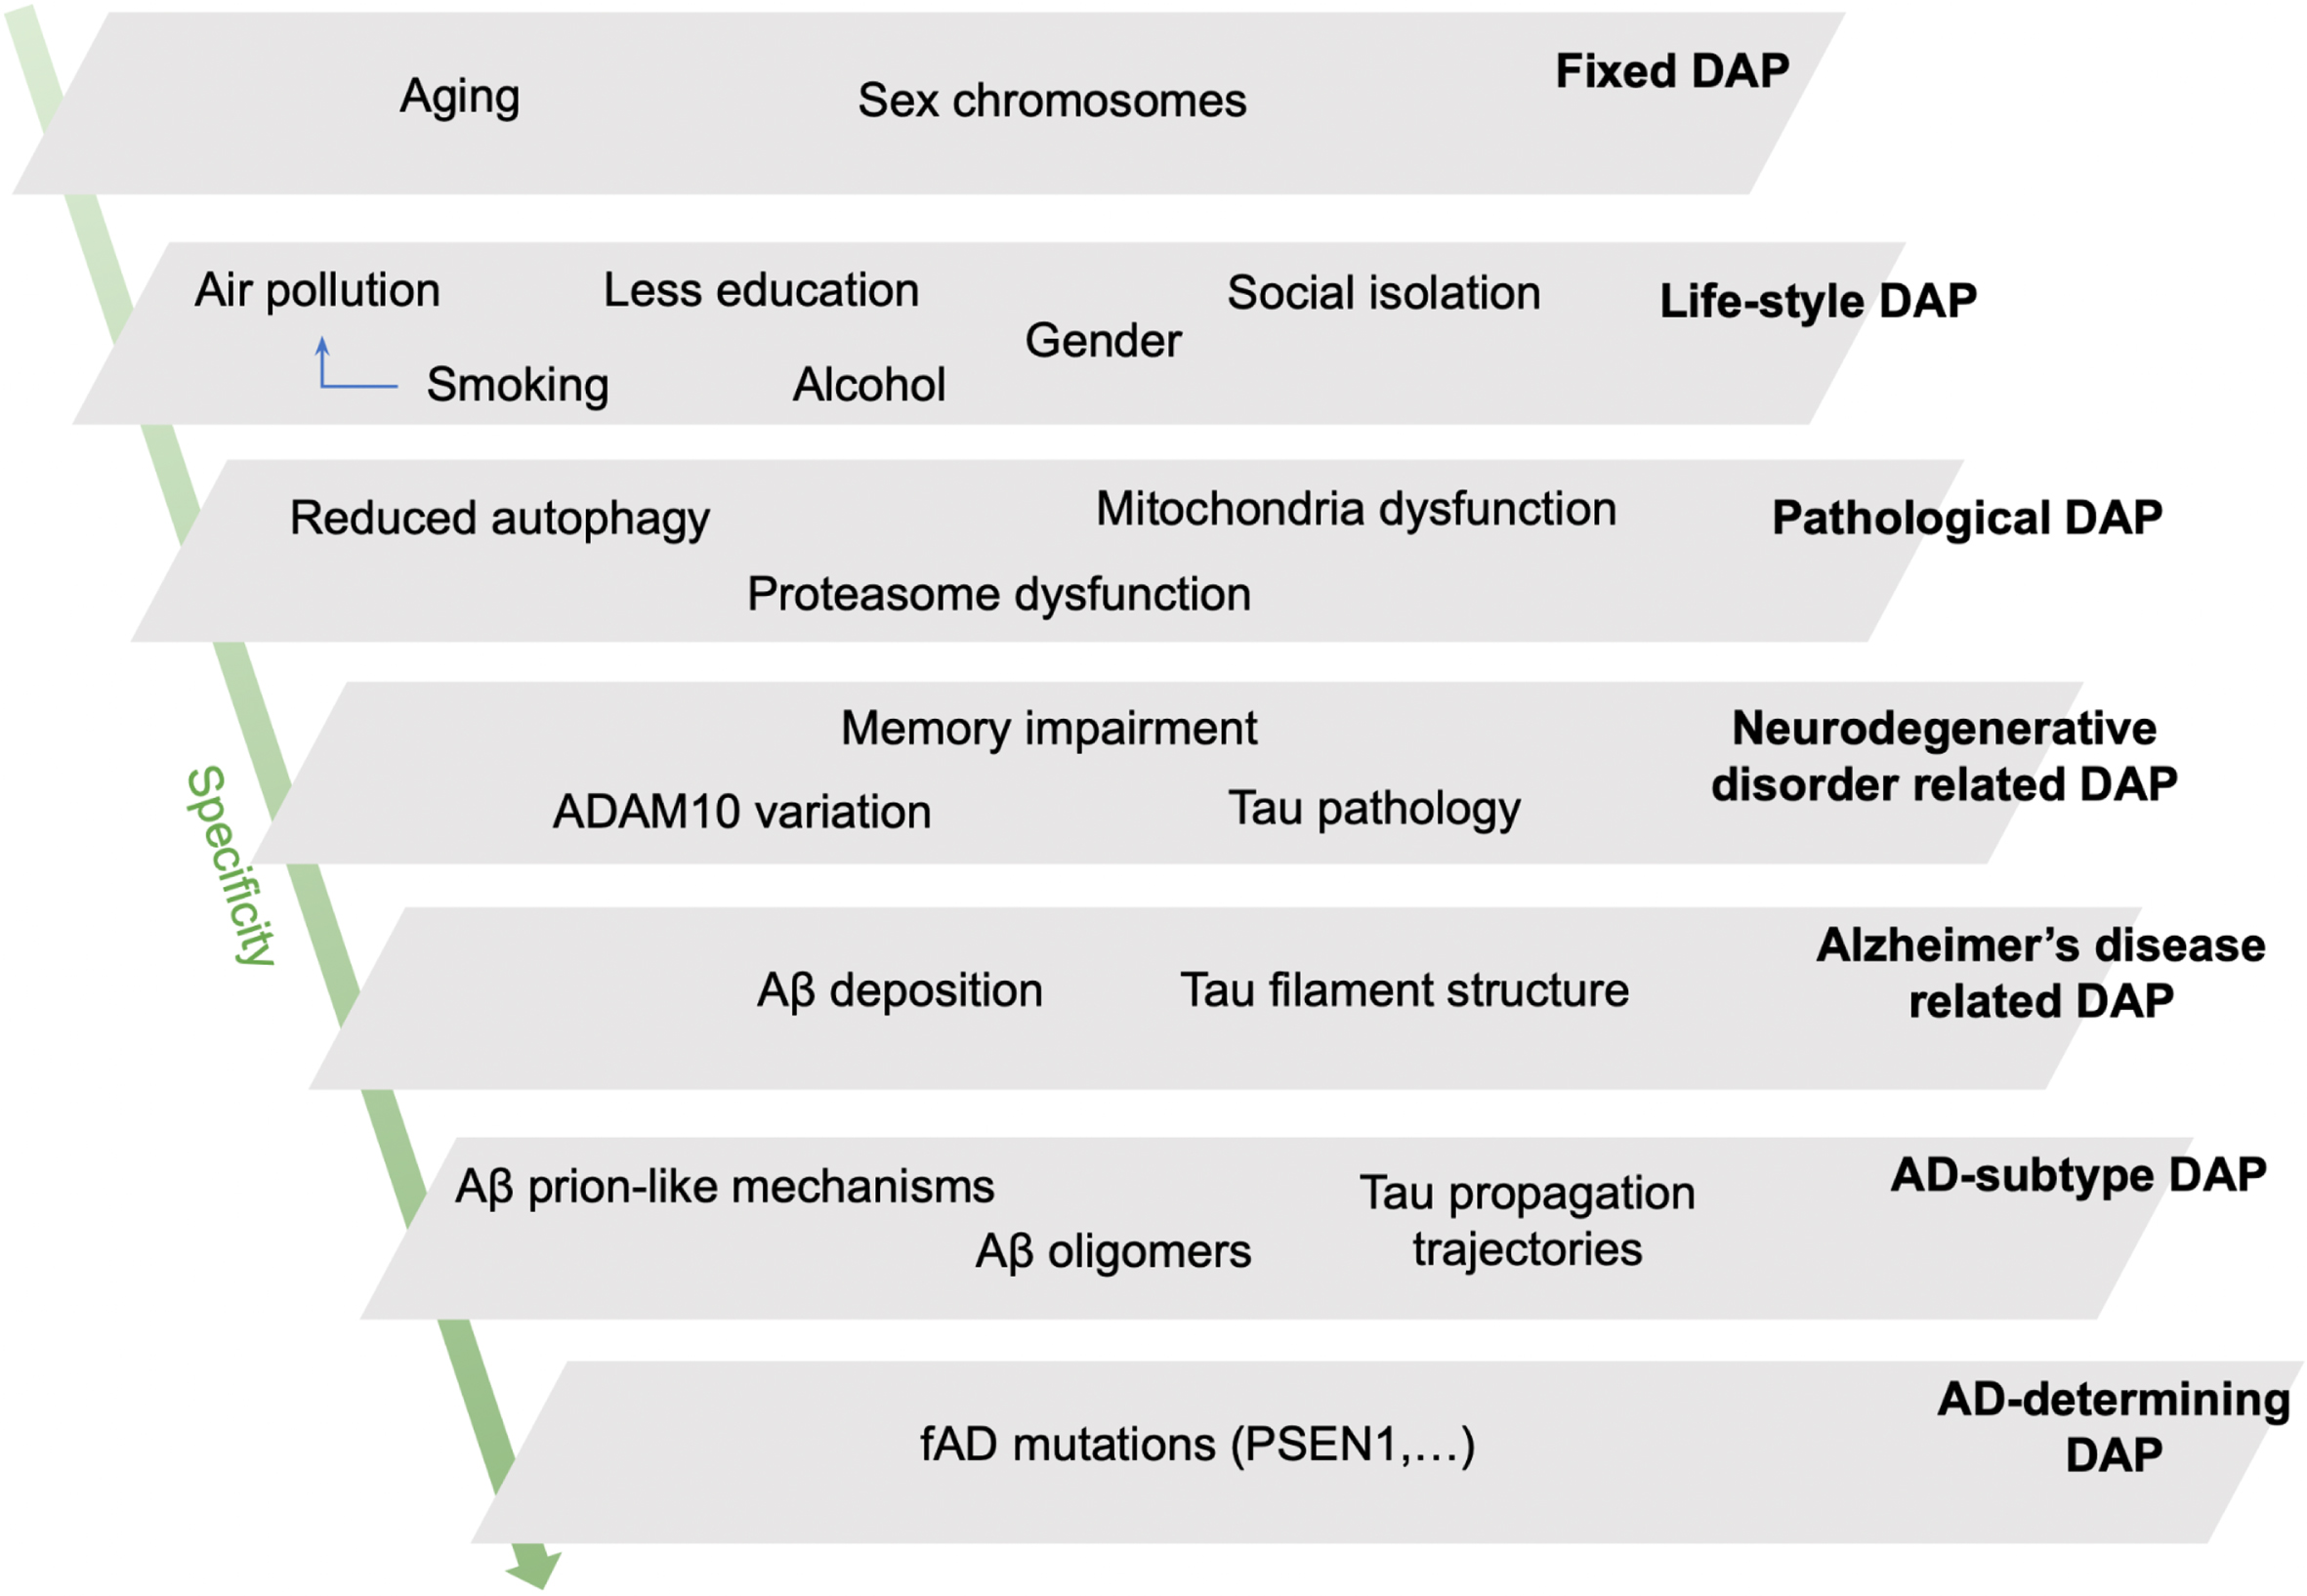 A schematic representation of our hypothetical model of disease associated processes (DAPs) for Alzheimer’s disease (AD) sorted by level of specificity. The schema allows for the understanding of why a specific patient or patient population may develop AD due to the converging pathological burden of several DAPs at different specificity levels. Fixed DAPs cannot be changed (age, sex chromosomes). DAPs of social determinants and lifestyle, such as smoking and alcohol use, are the next least specific DAPs. Pathological DAPs are those which clinicians use to define different diseases; DAPs involved in neurodegenerative disease contribute to cognitive decline in AD, but for non-specific reasons, e.g., cerebrovascular impairments. Amyloid-β accumulation and tau hyperphosphorylation are used to define AD-type impairments as per the literature. AD-determining DAPs are restrained to deterministic mutations affecting amyloid-β metabolism in familial autosomal dominant AD (ADAD). Aβ, amyloid-β; fAD, familial (autosomal dominant) AD (aka. ADAD).